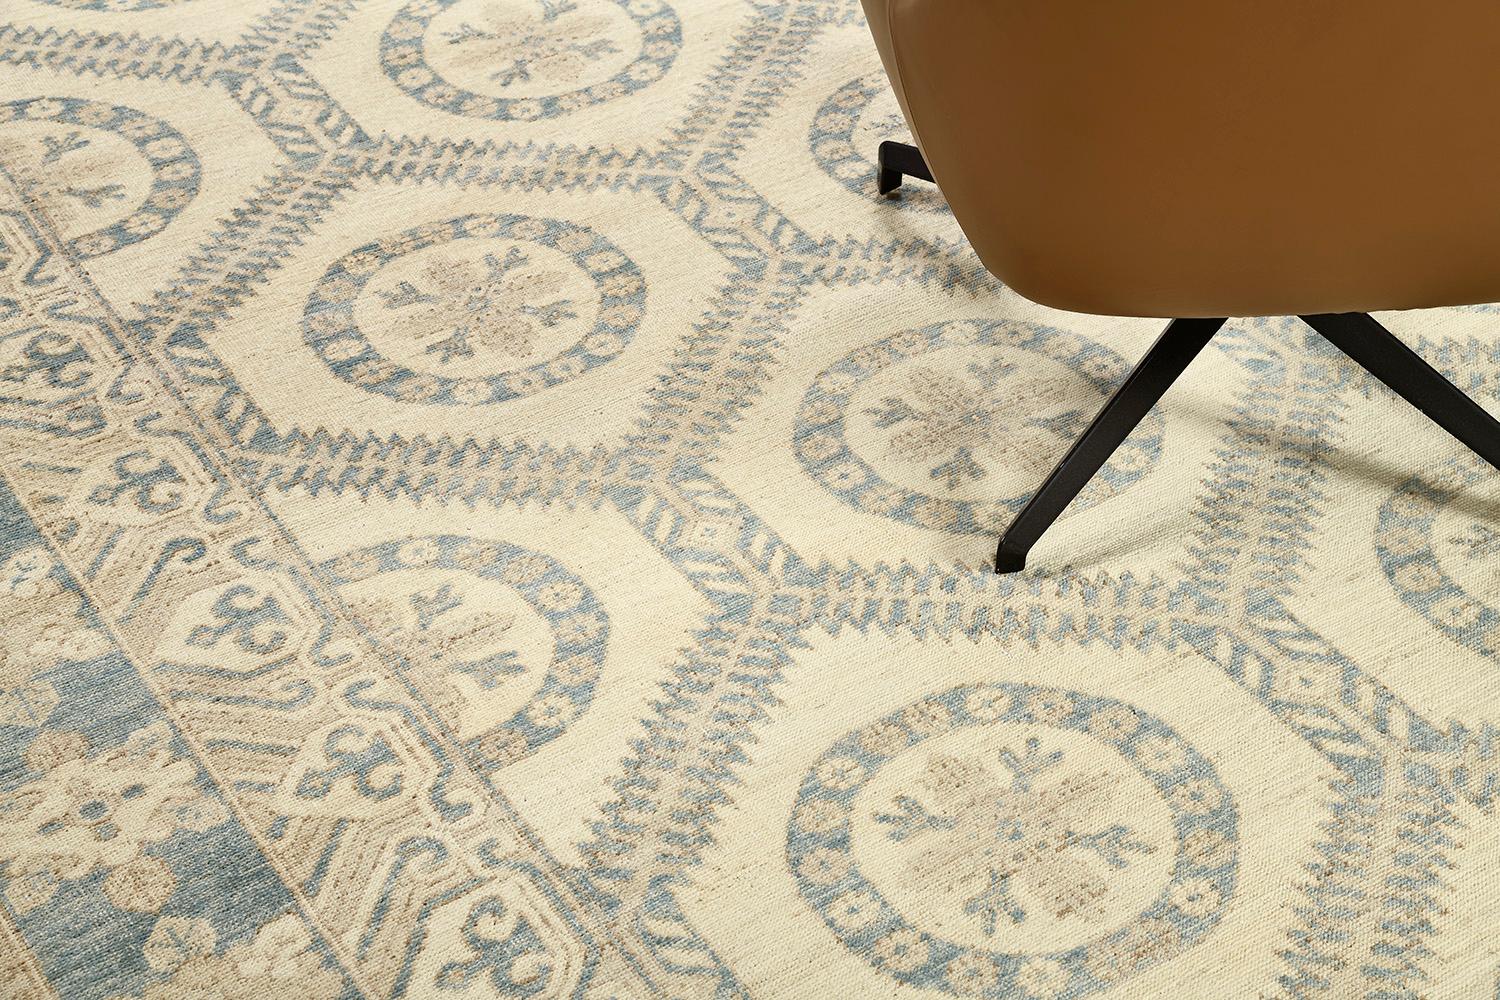 An astounding recreation of Arts and Craft style rug that features the elegant tones of blue and sand. Fabricating gracefully in an ivory field, the geometrical pattern and ornamental embellishments are formed flawlessly enclosed by a classy border